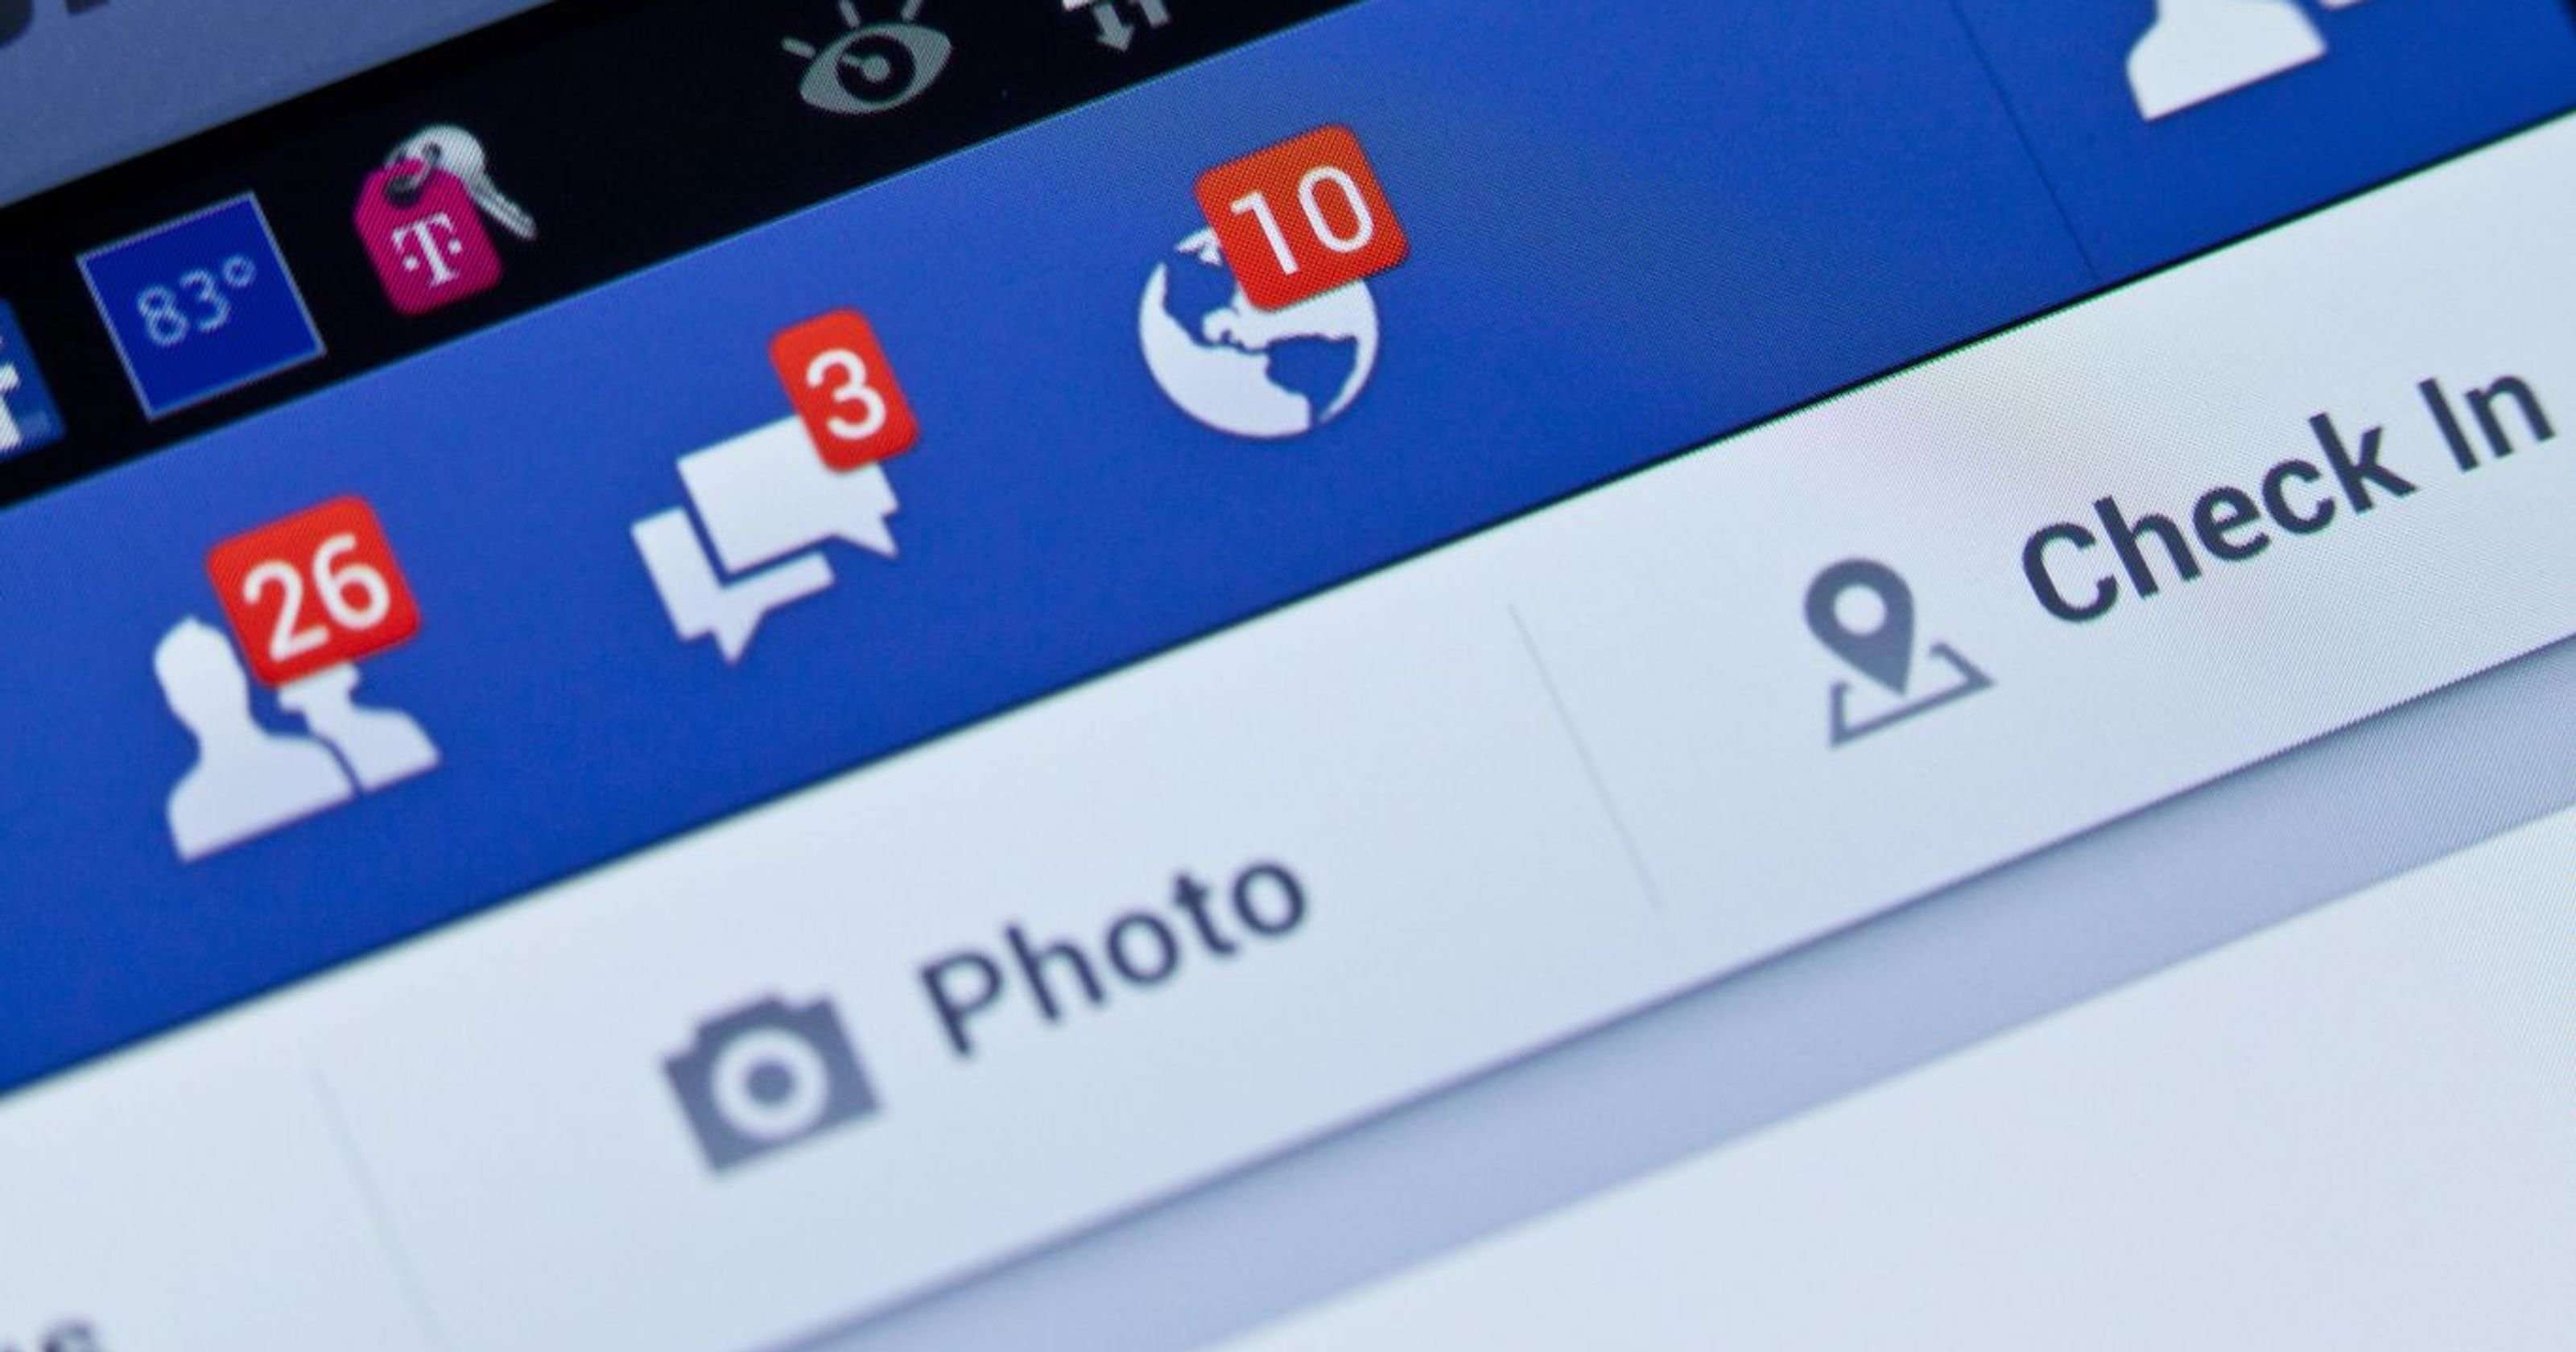 image for Half of Facebook users say they don't understand how news feed works